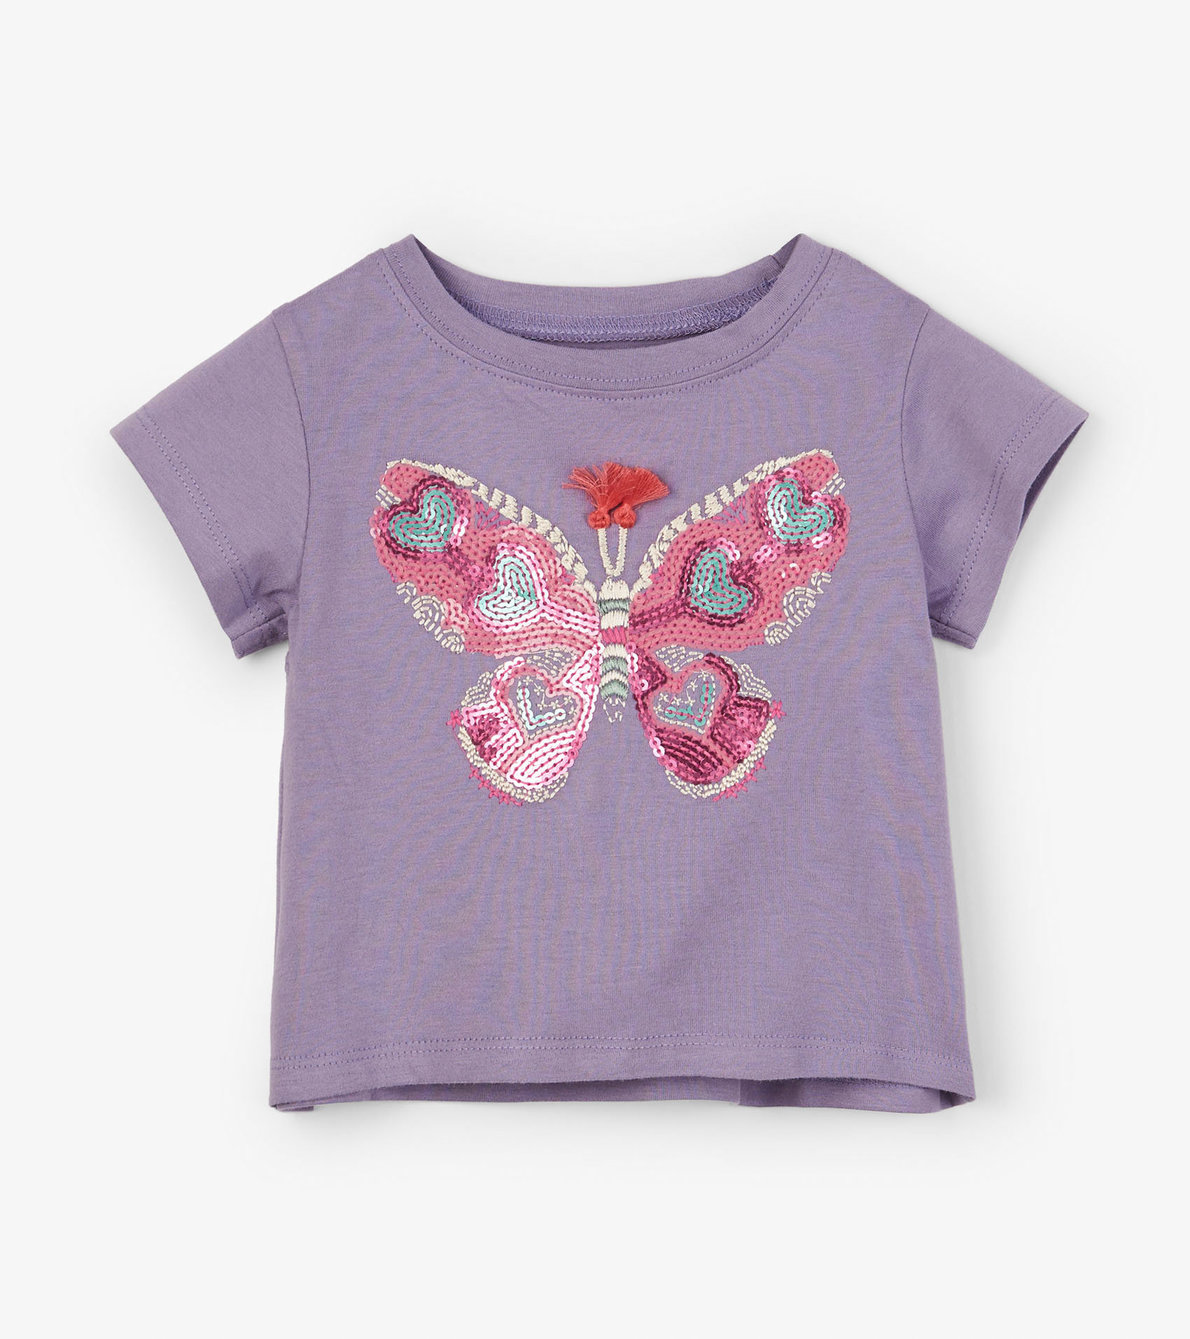 View larger image of Glitzy Butterfly Baby Tee